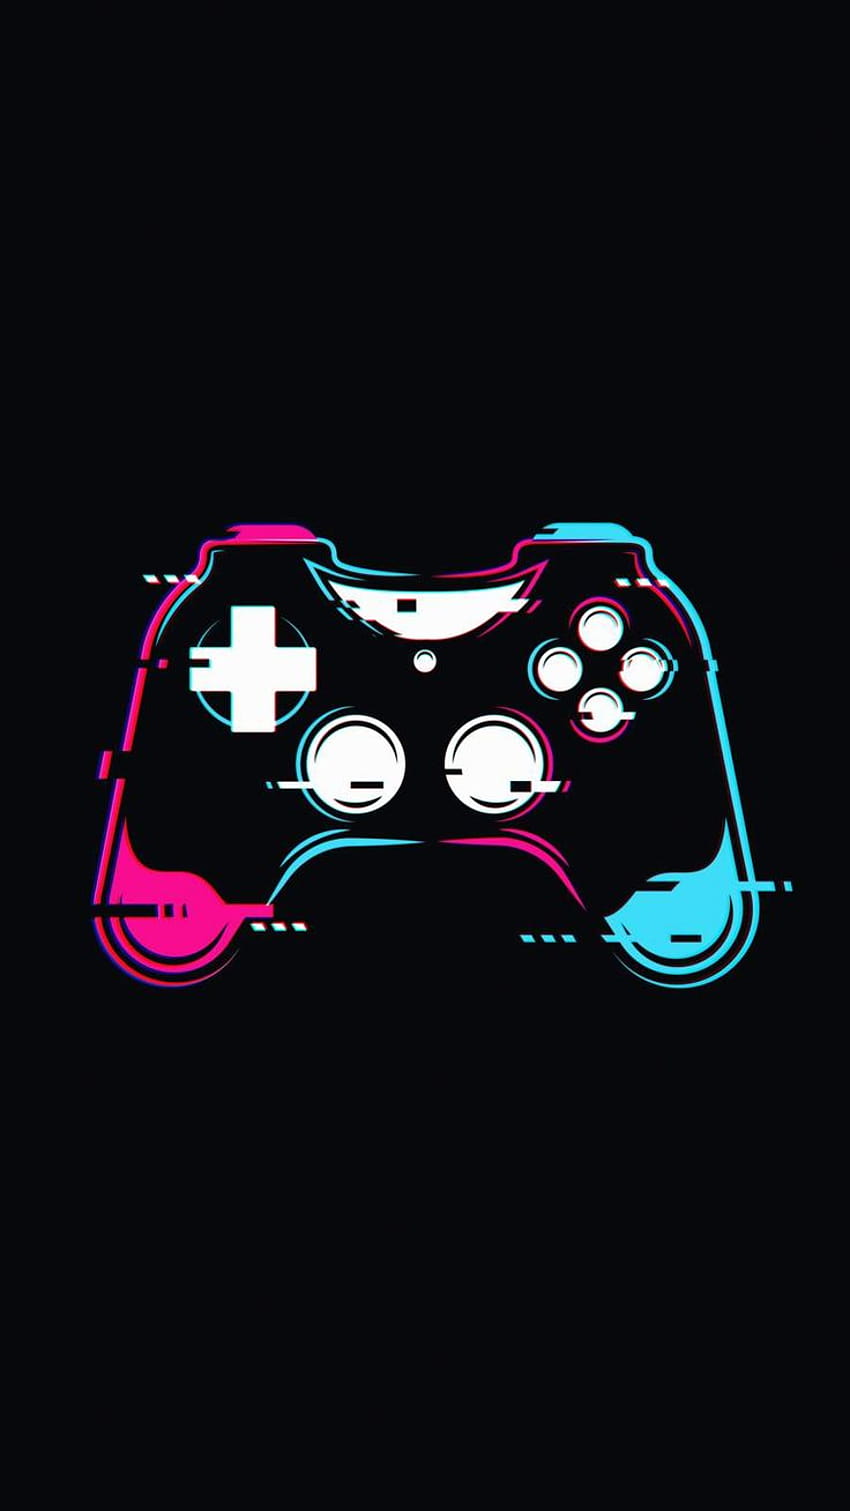 PS5 Controller iPhone, ps5 game iphone HD phone wallpaper